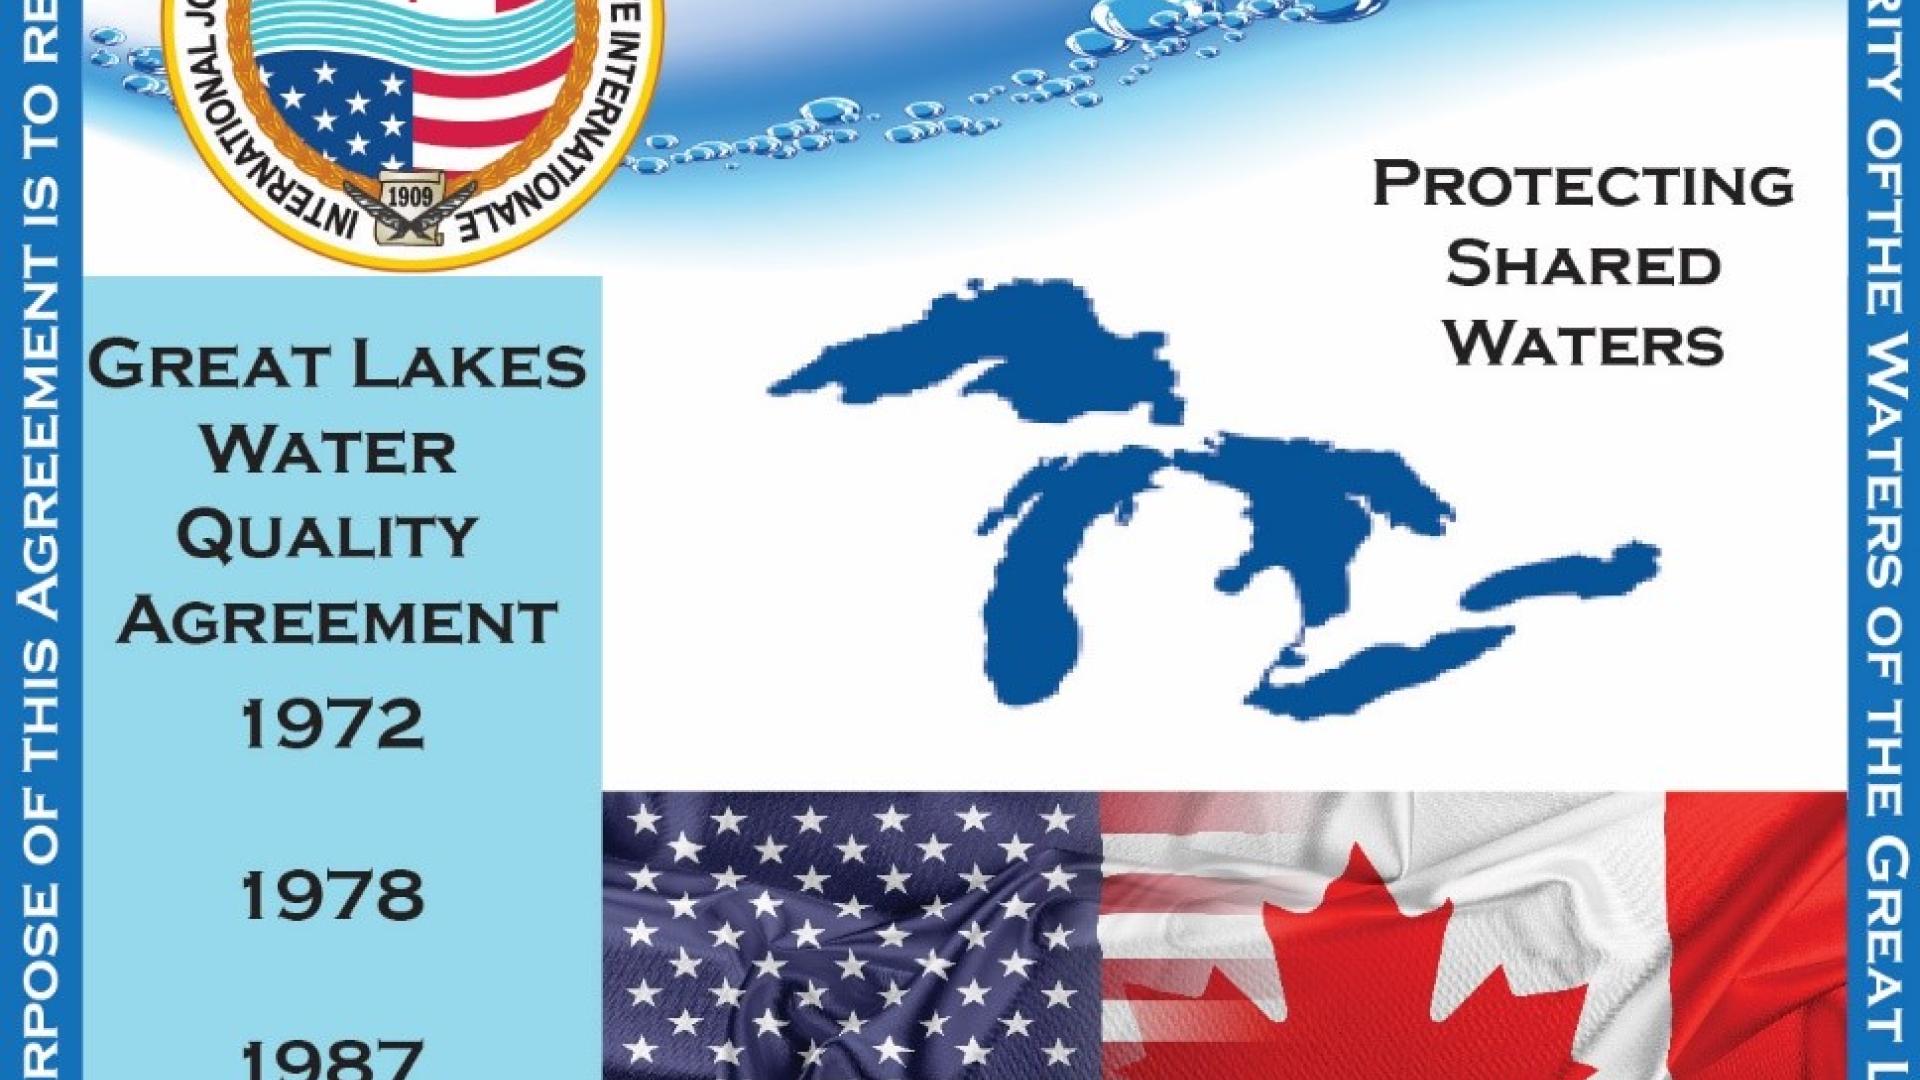 The Great Lakes Water Quality Agreement, signed in 1972, was most recently revised in 2012. Credit: Monique Myre